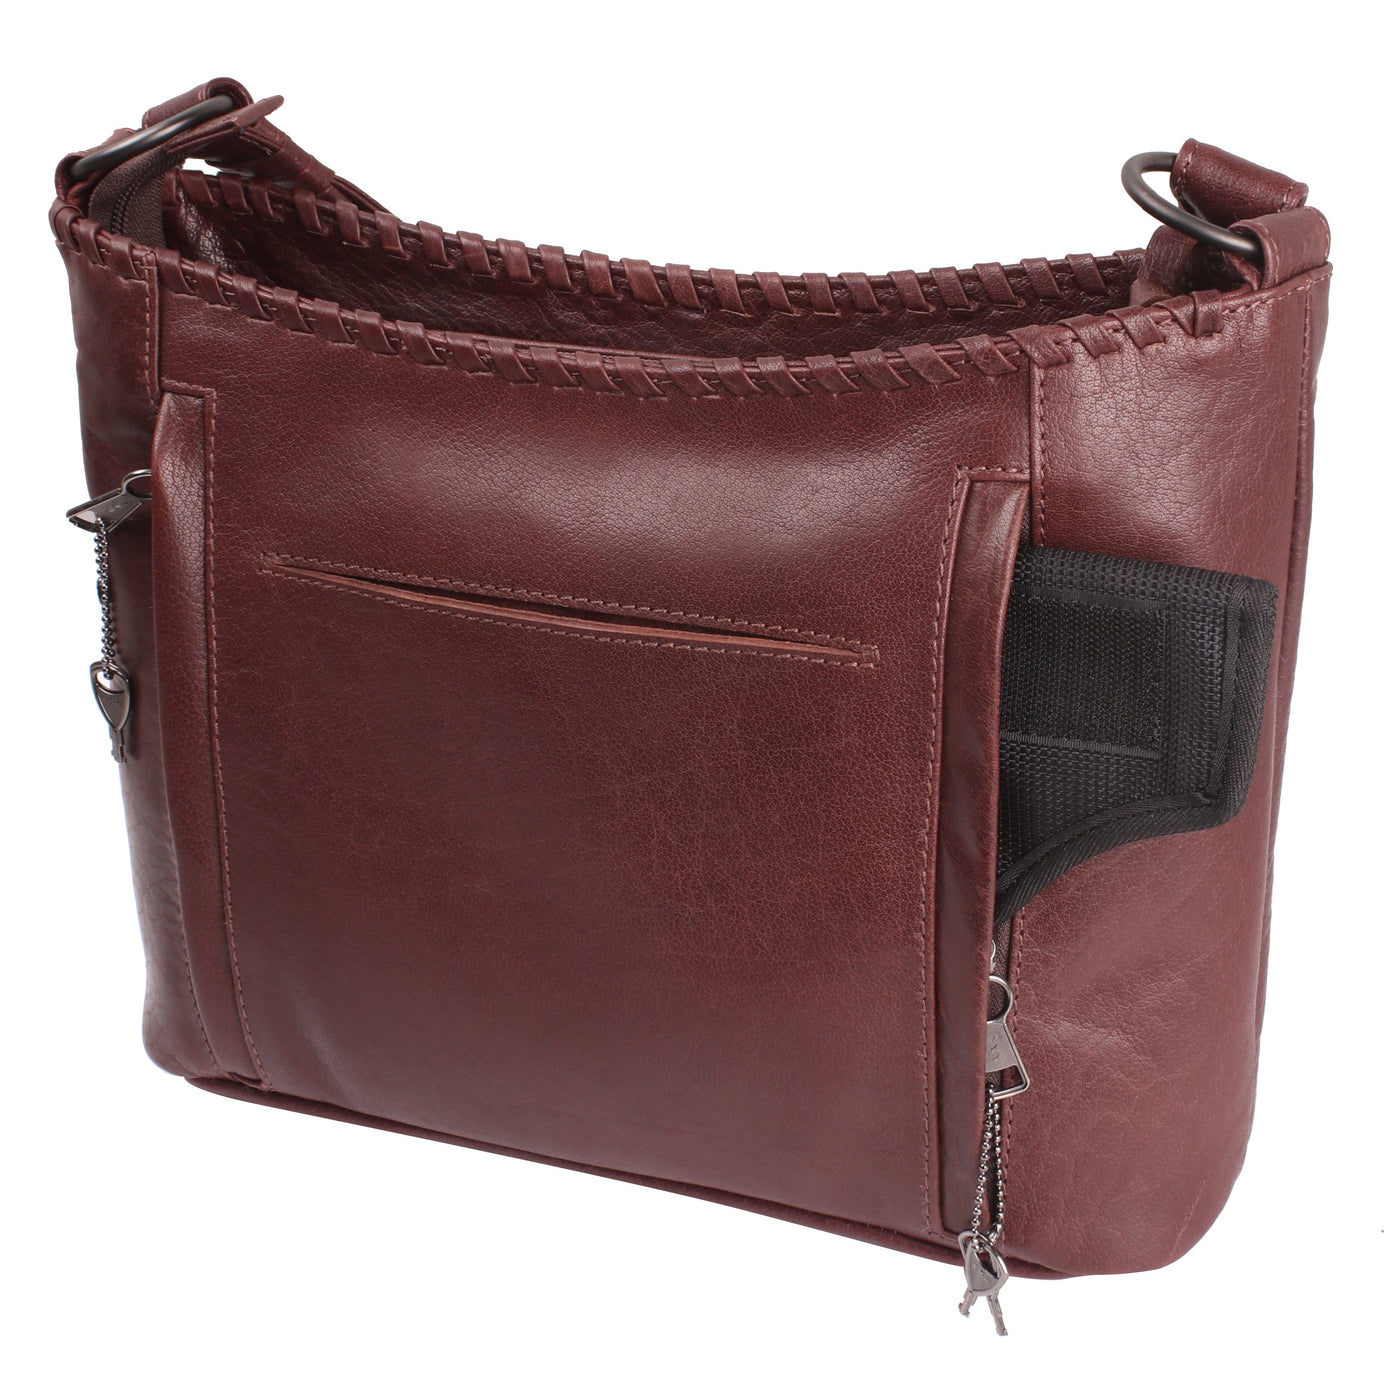 Concealed Carry Juliana Leather Hobo - Lady Conceal - Concealed Carry Purse - Lady Conceal